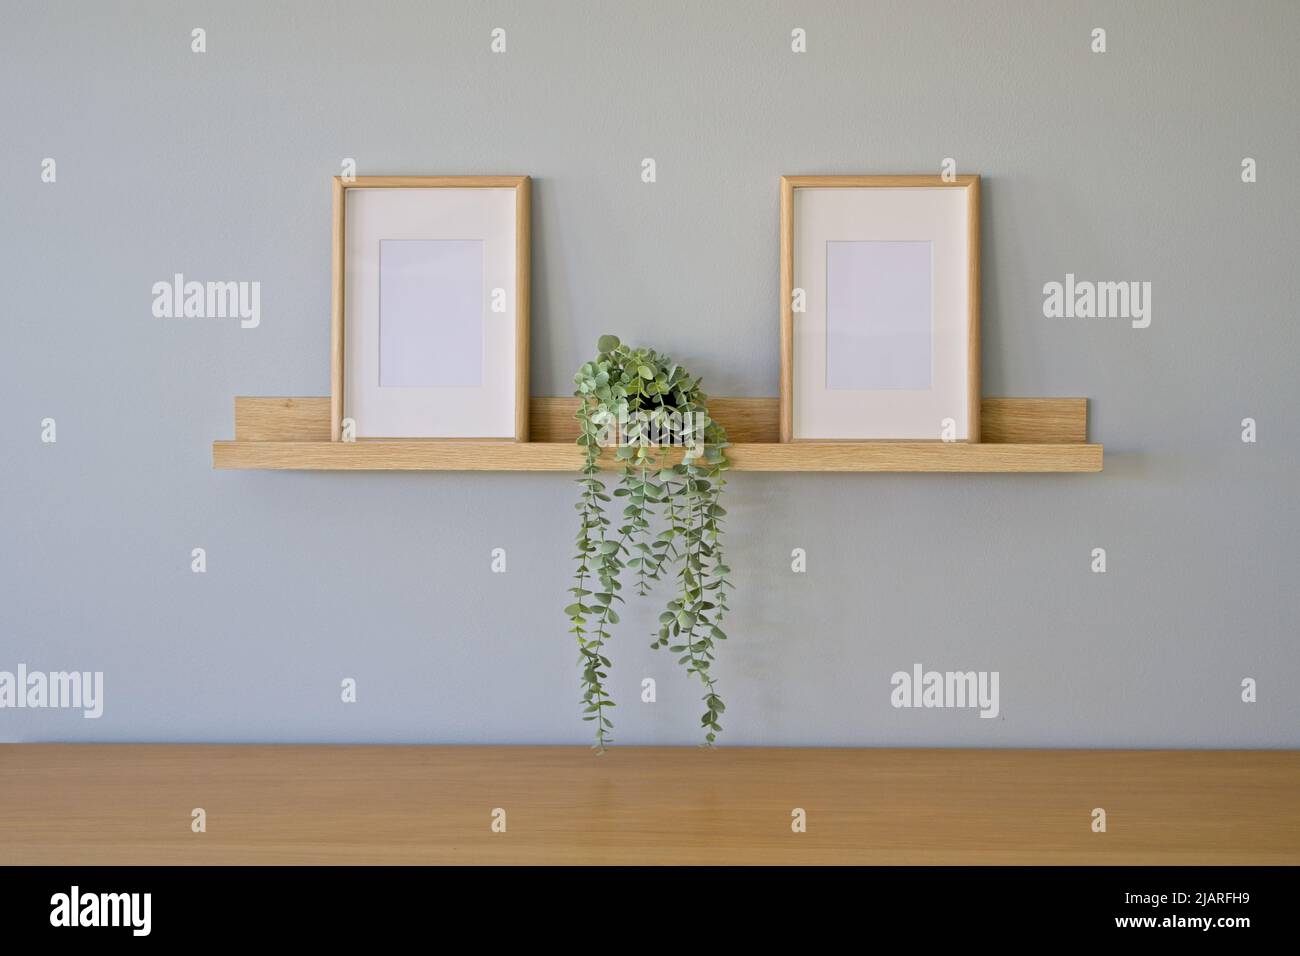 Interior frame mockup with empty frame on a wooden shelf Stock Photo